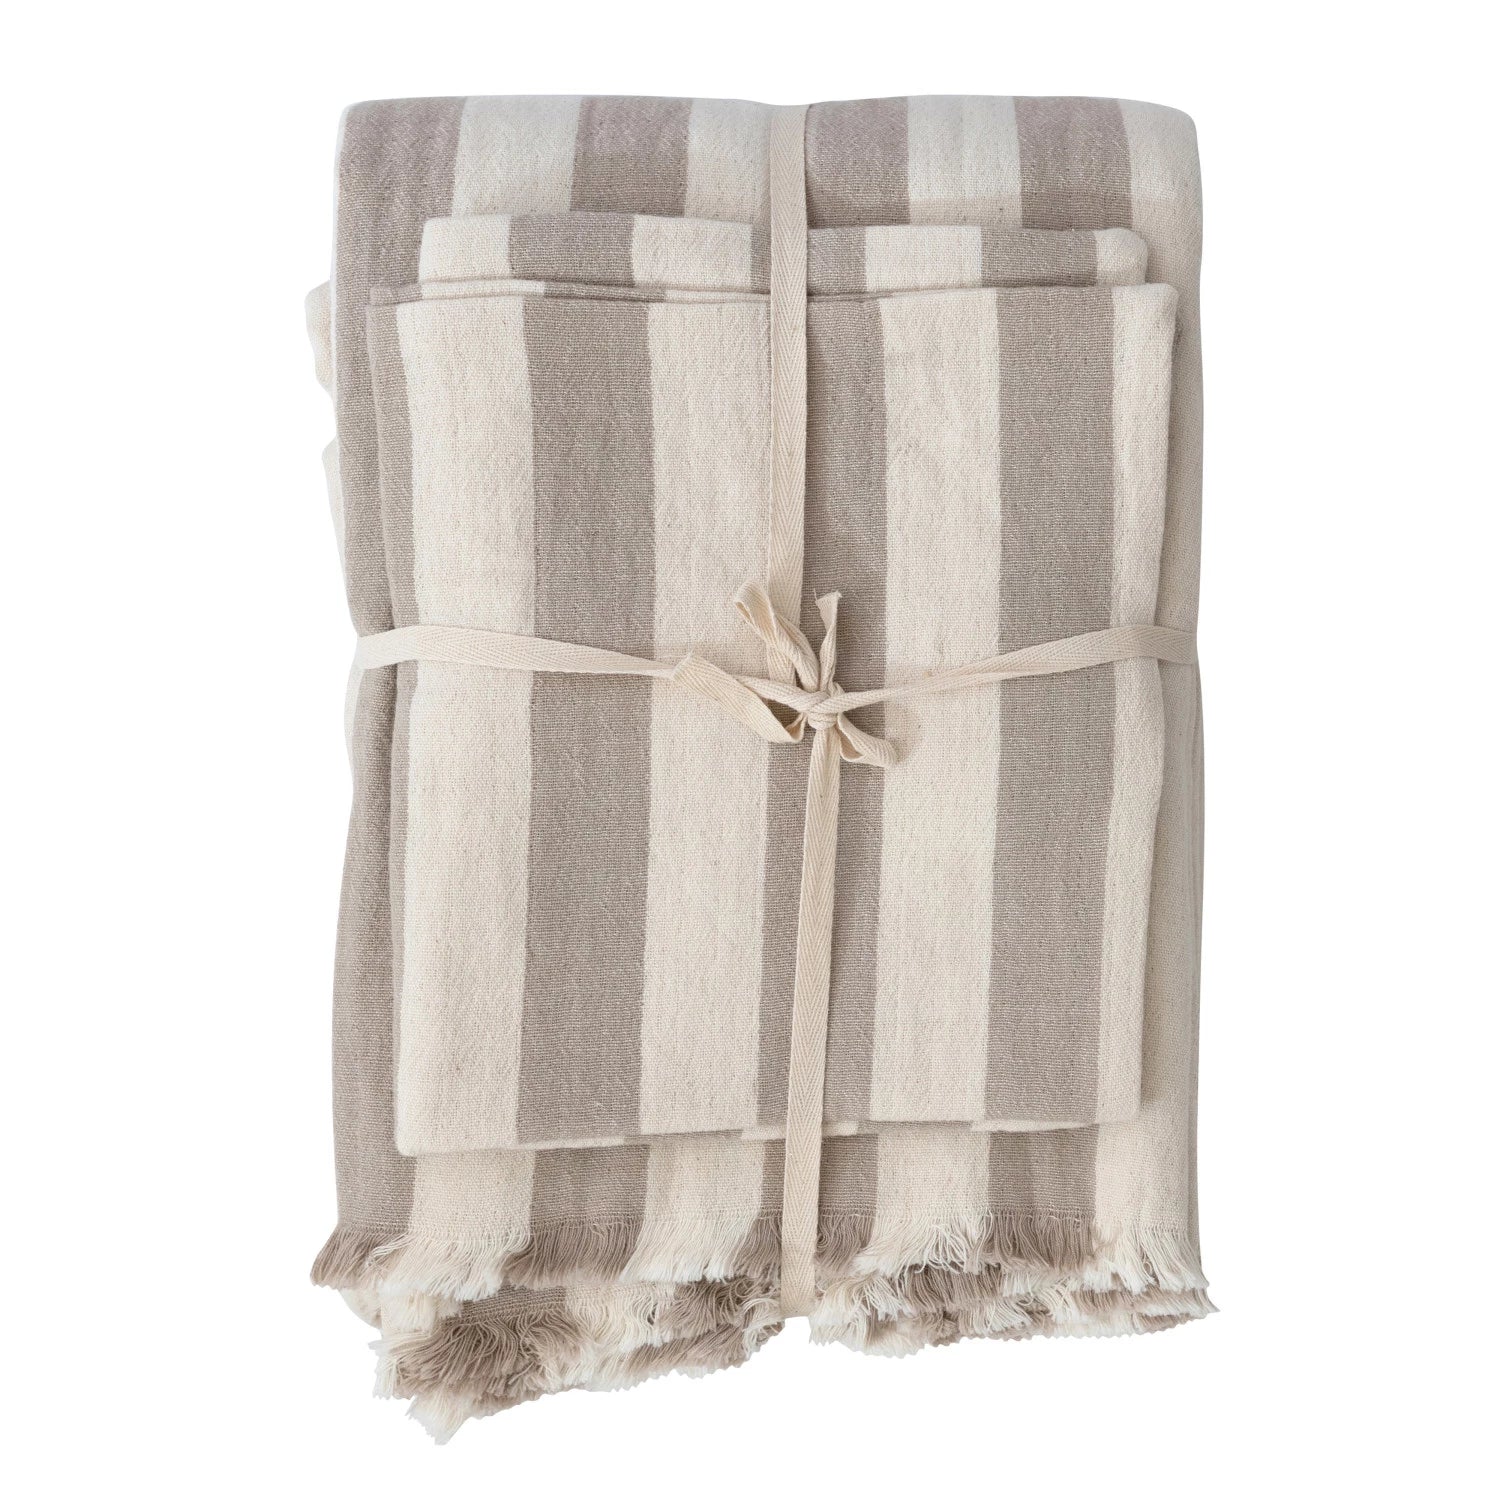 Cream & Tan Striped Queen Coverlet with Shams